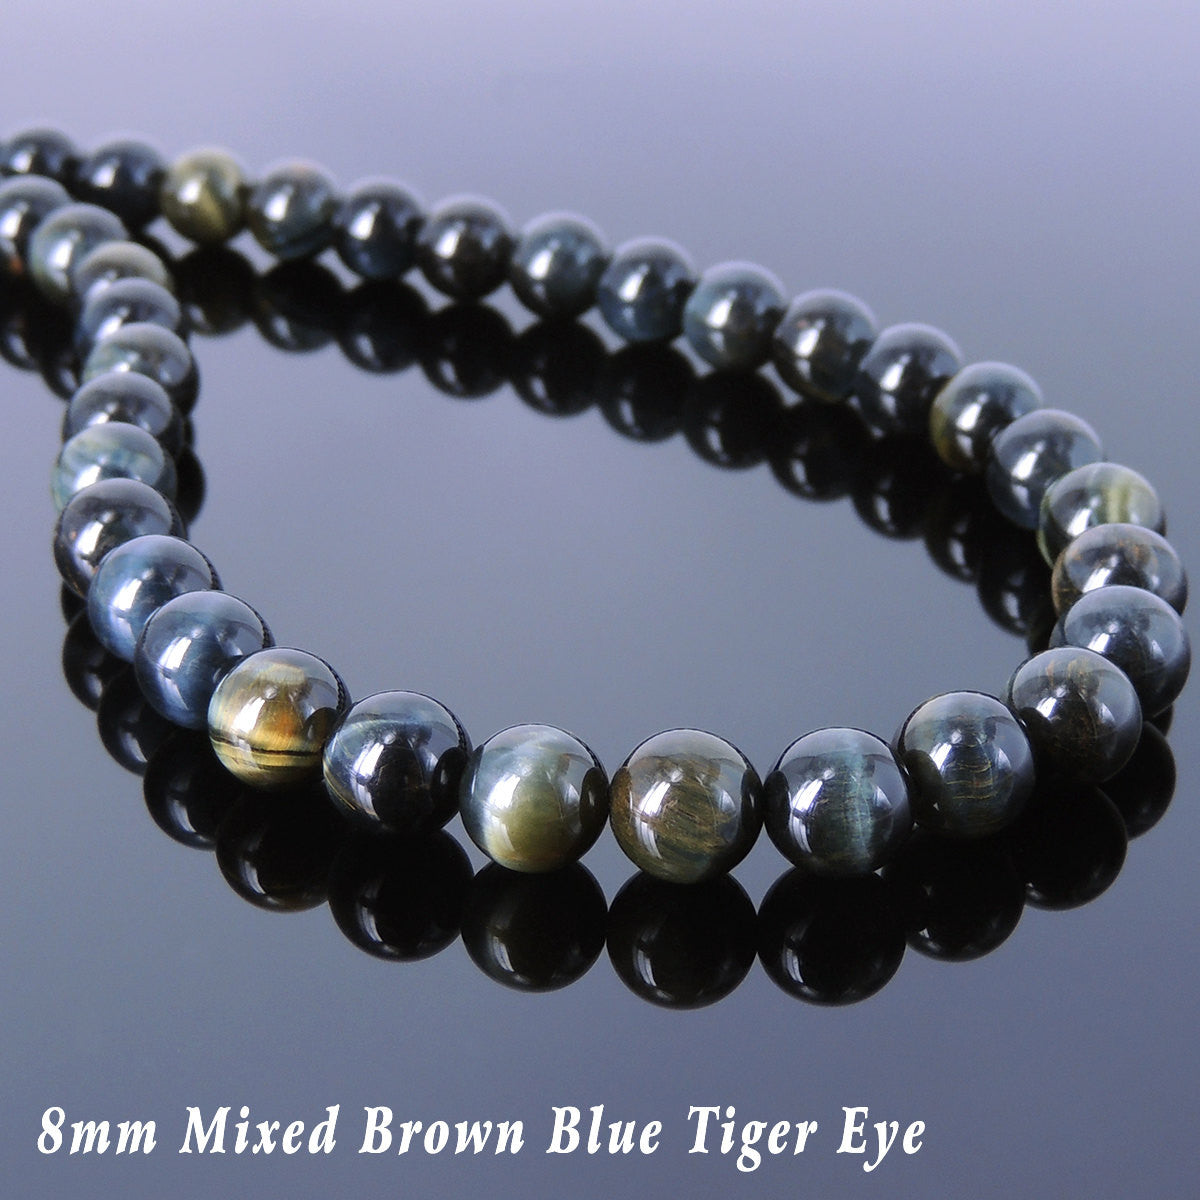 8mm Rare Mixed Brown Blue Tiger Eye Healing Gemstone Necklace with S925 Sterling Silver Spacers & S-Hook Clasp - Handmade by Gem & Silver NK096